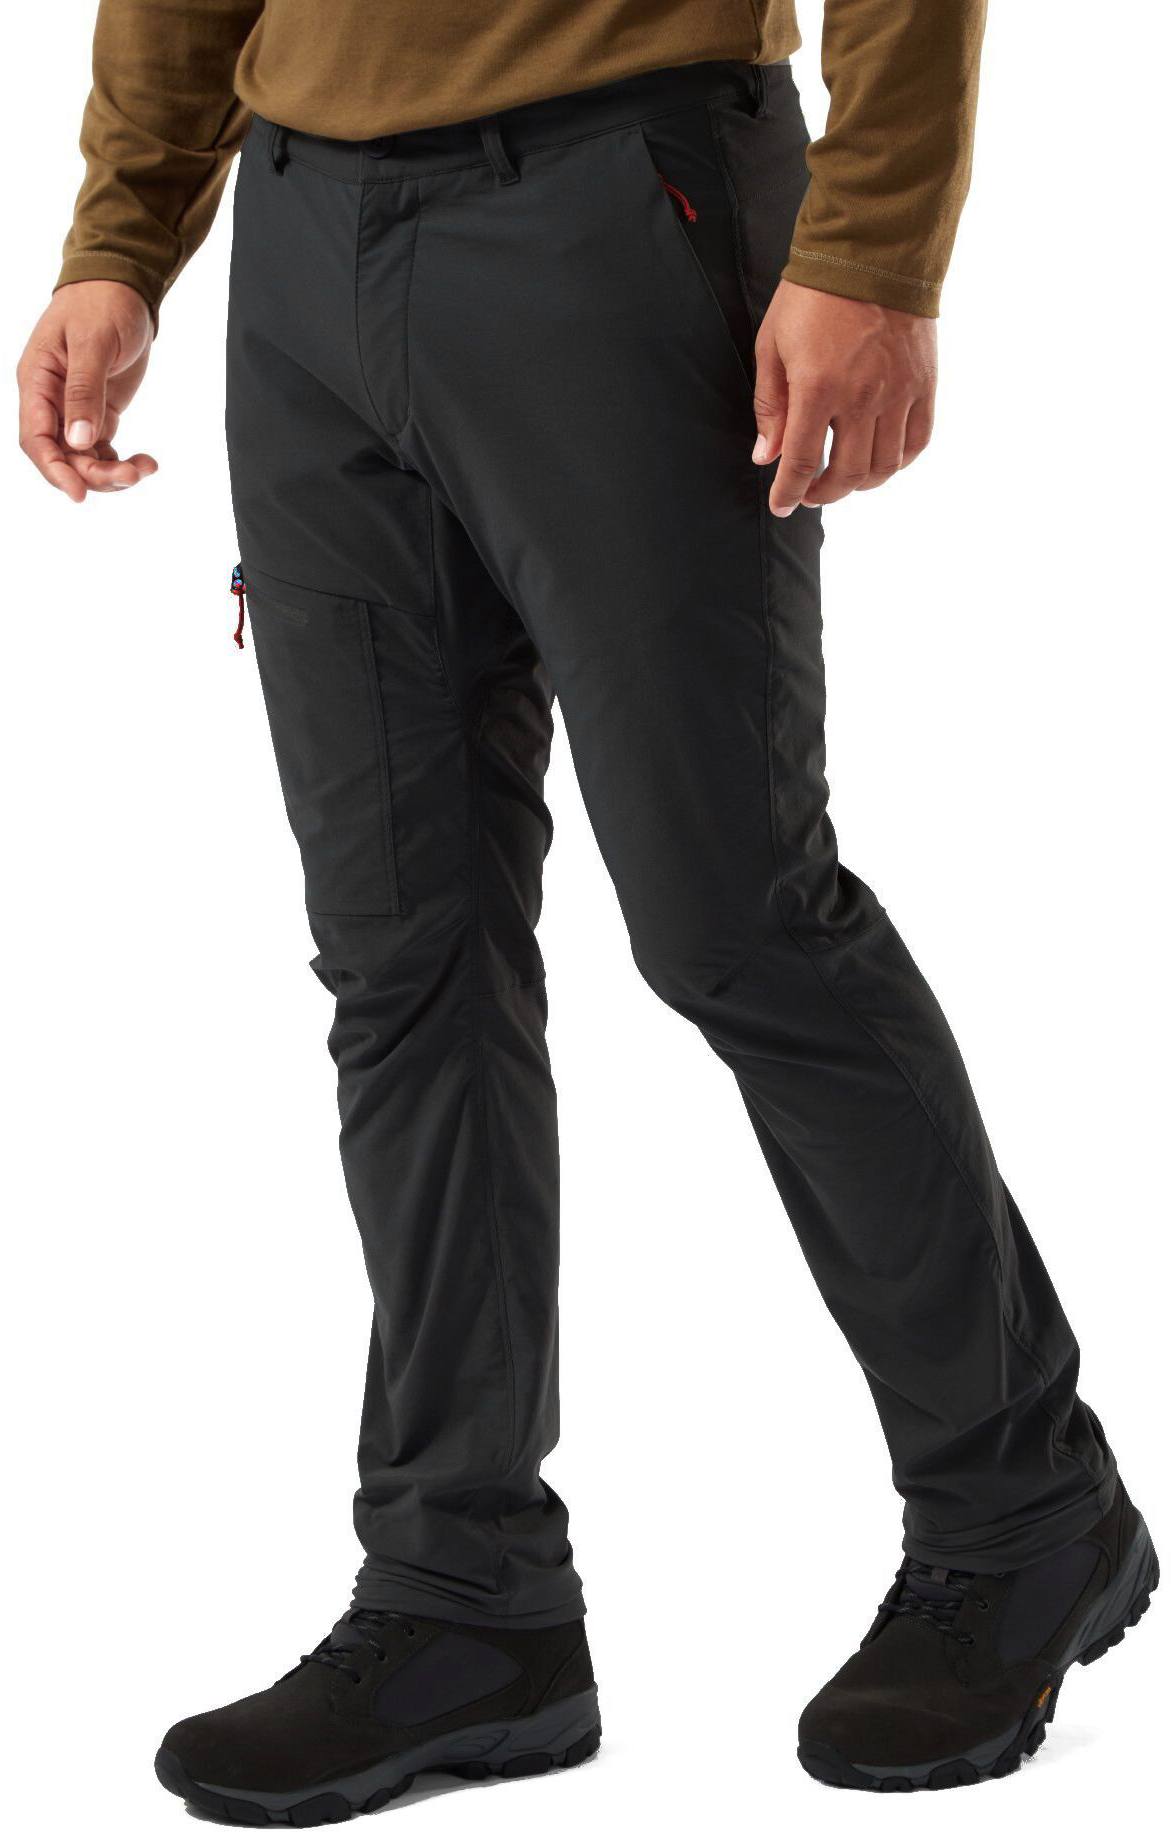 Craghoppers NosiLife Pro Active Trousers Black 30